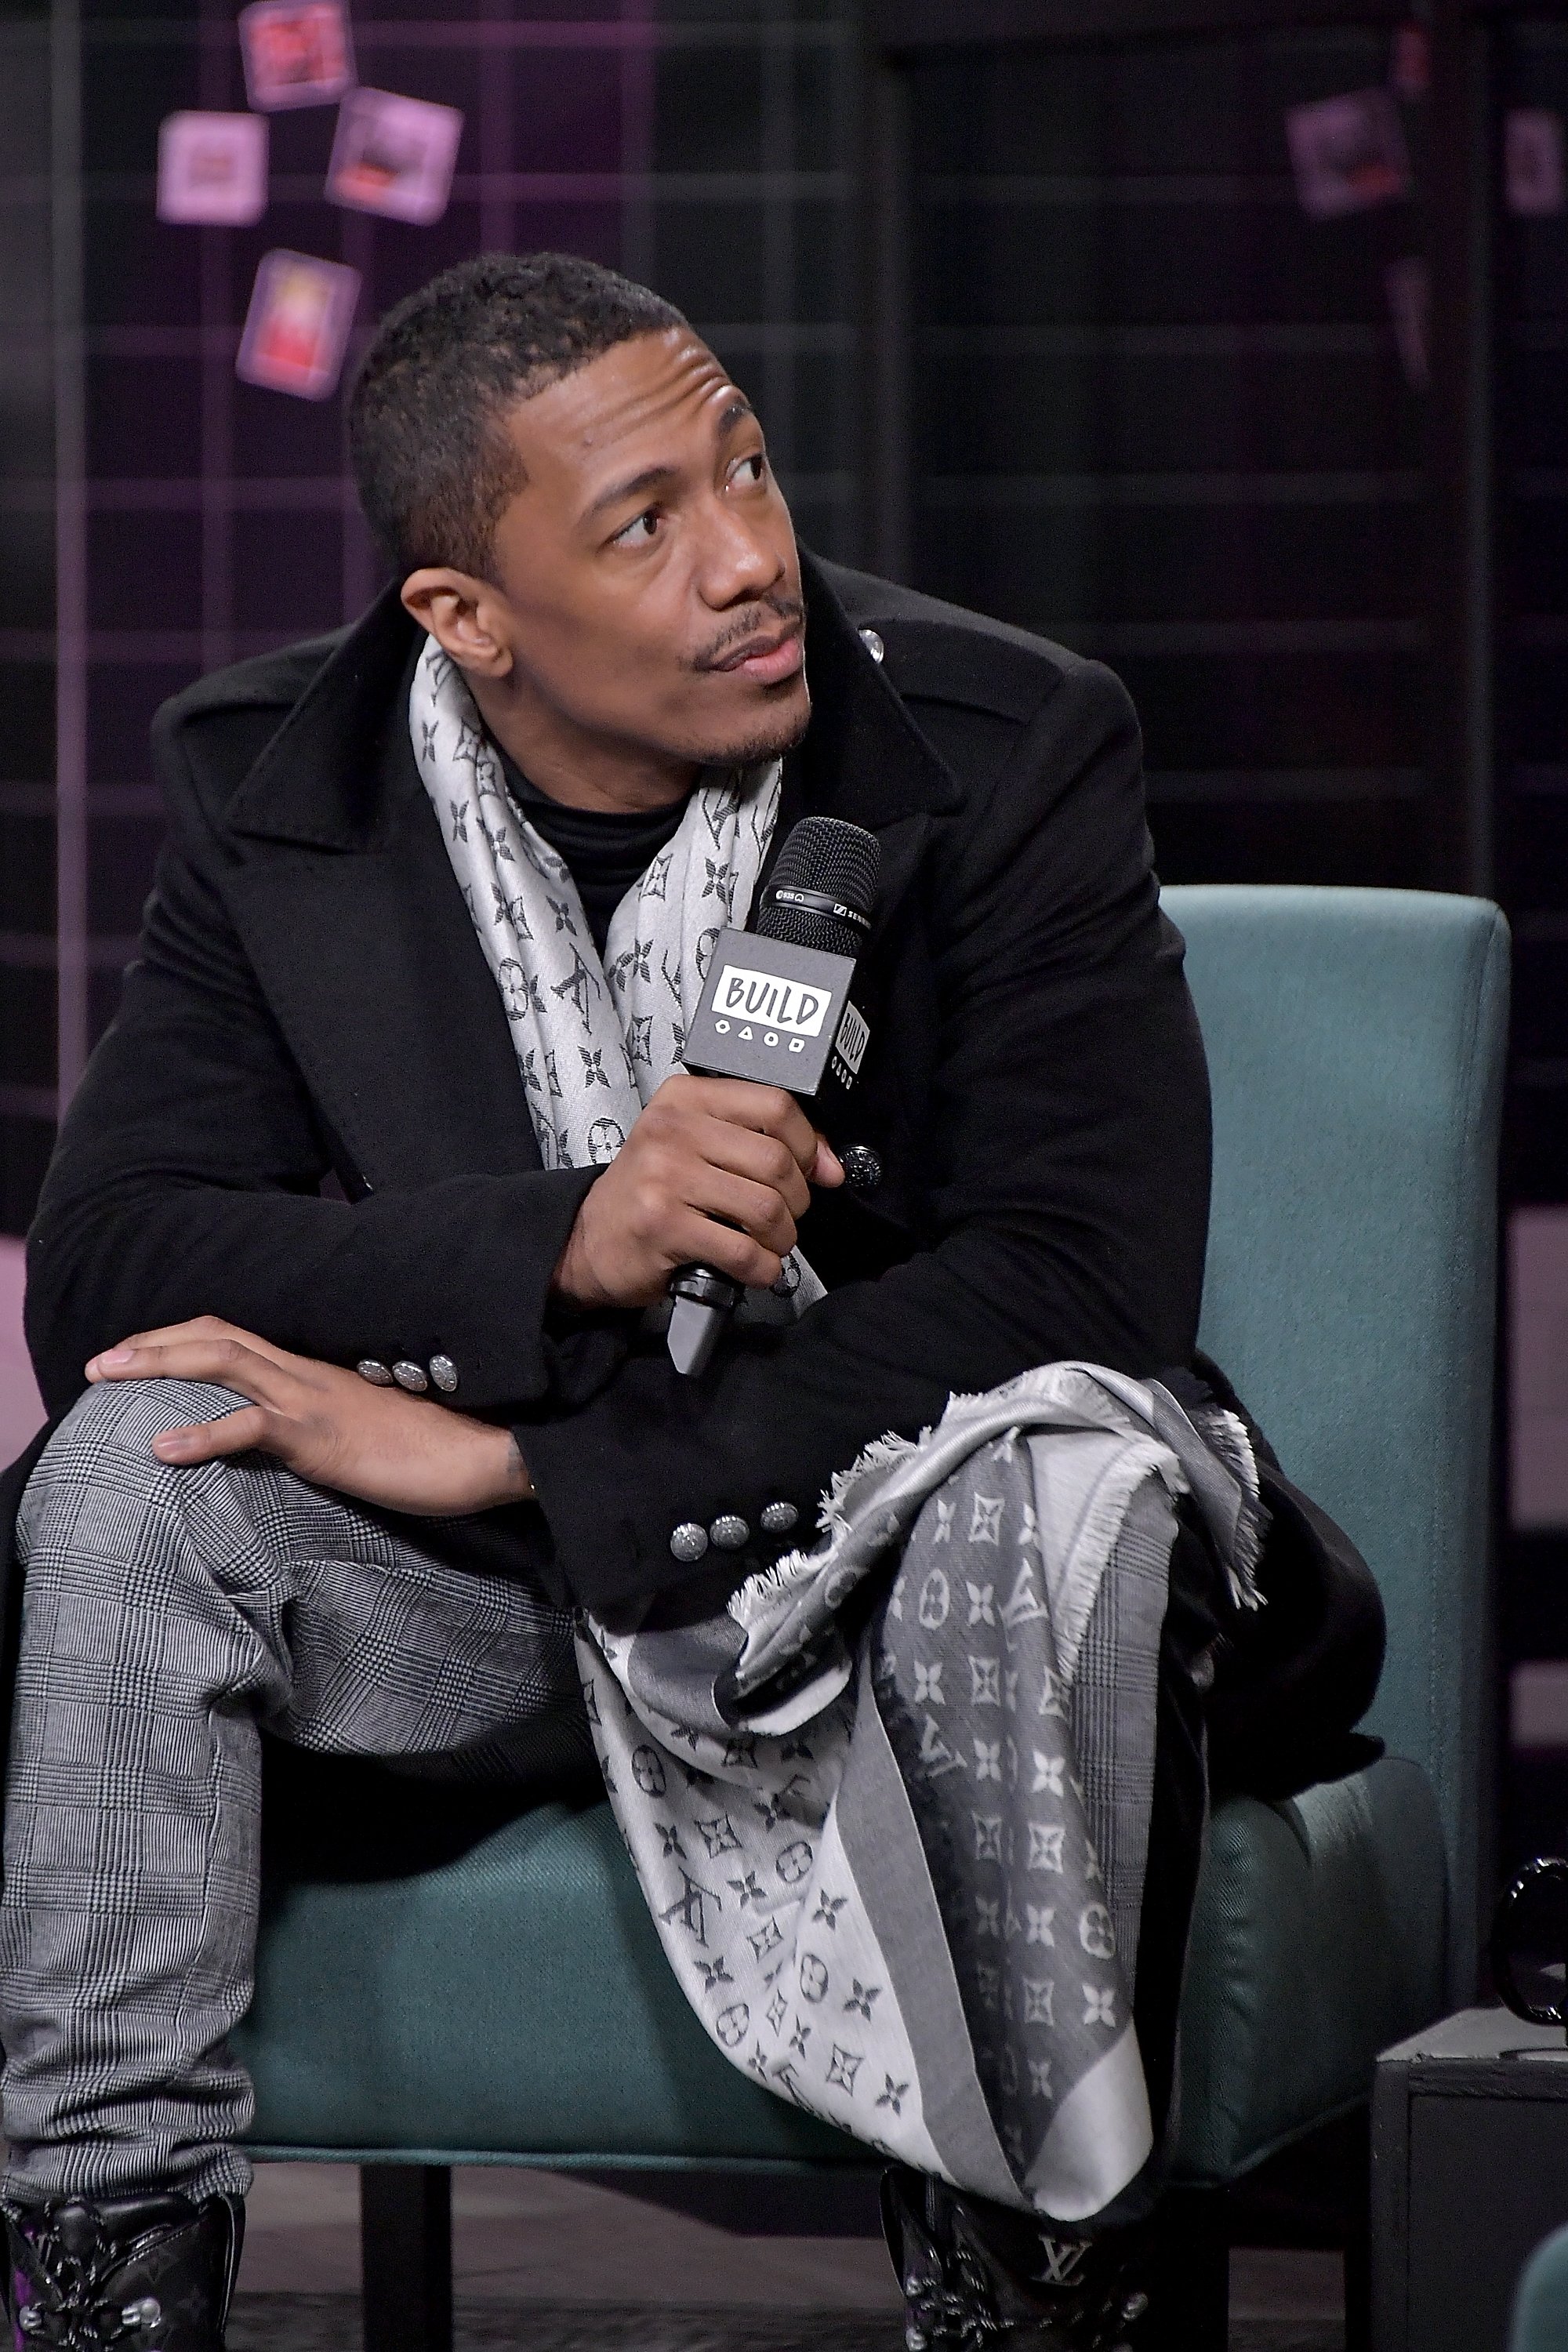 Nick Cannon at Build Studio to discuss his reality show, "The Masked Singer" on Dec. 11, 2018 in New York City | Image: Getty Images